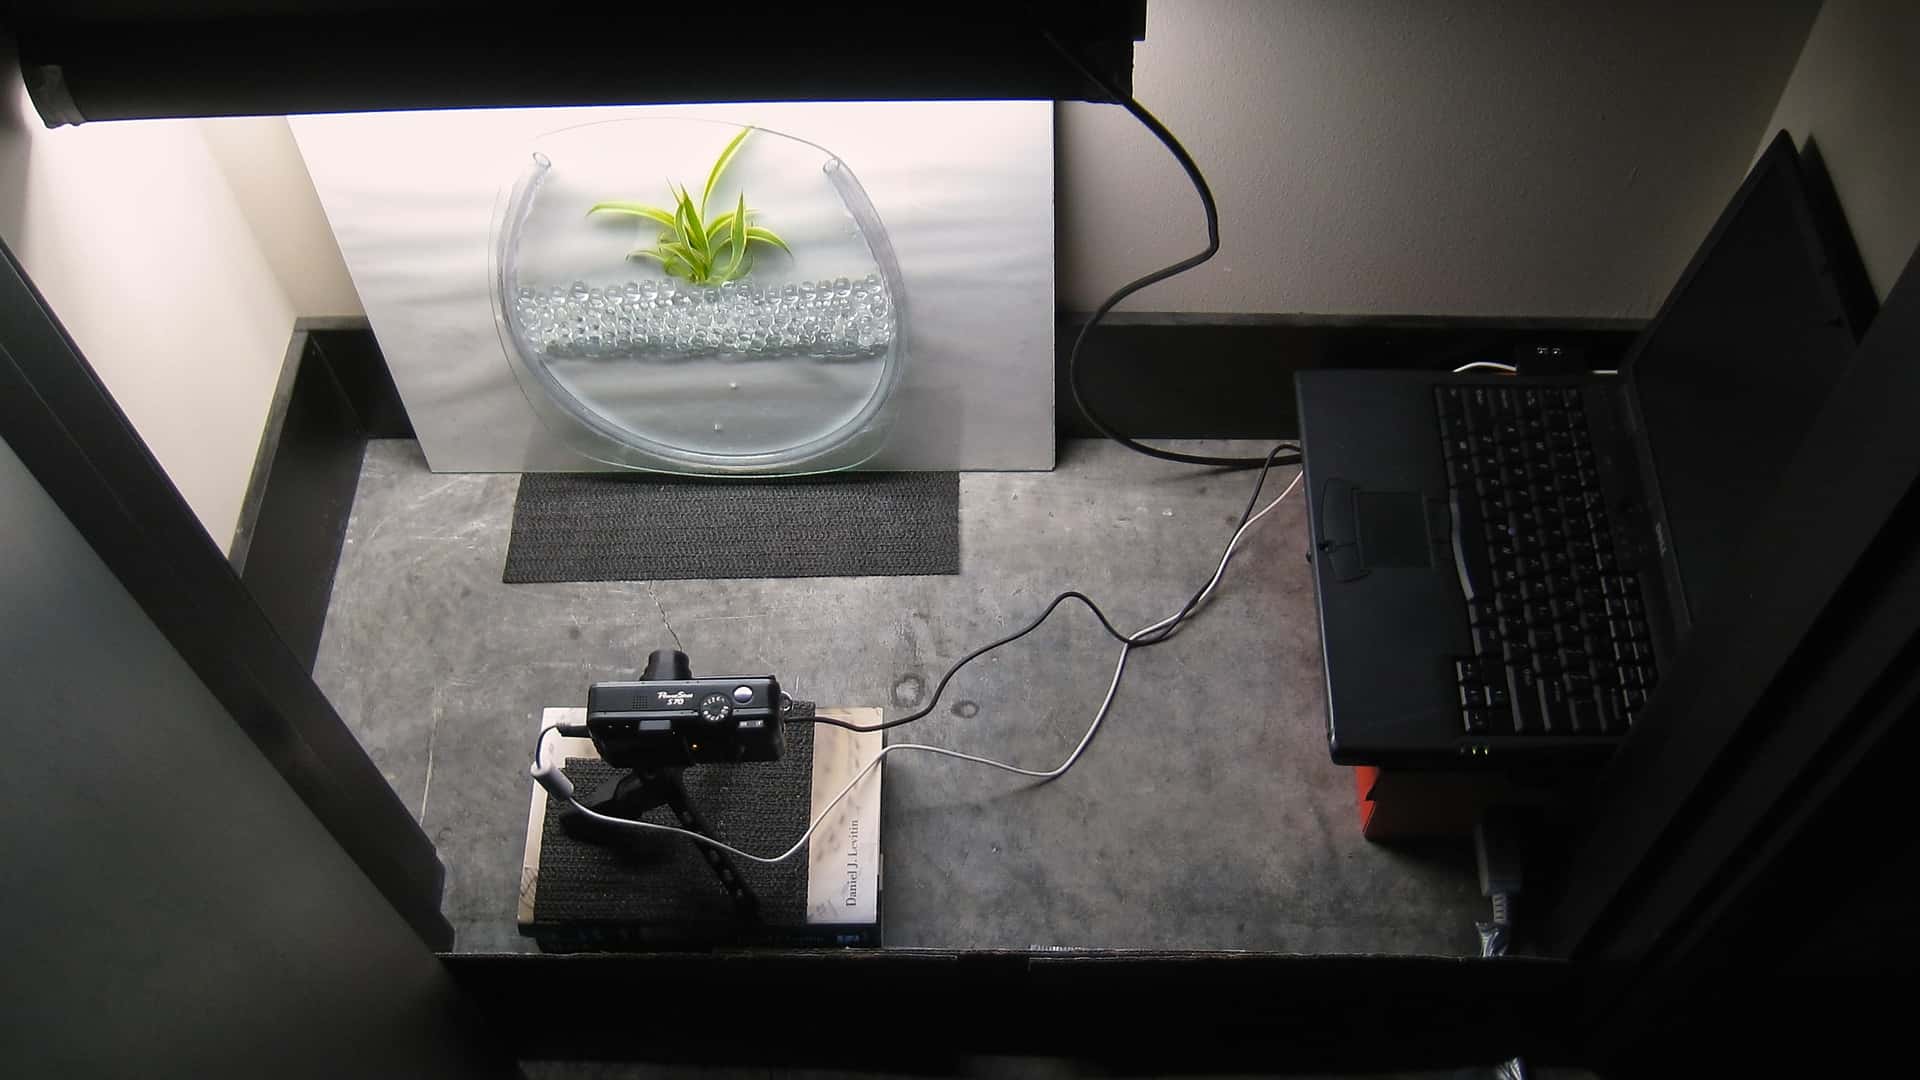 digital camera connected to a laptop capturing a time lapse of a spider plant growing in flat glass enclosure